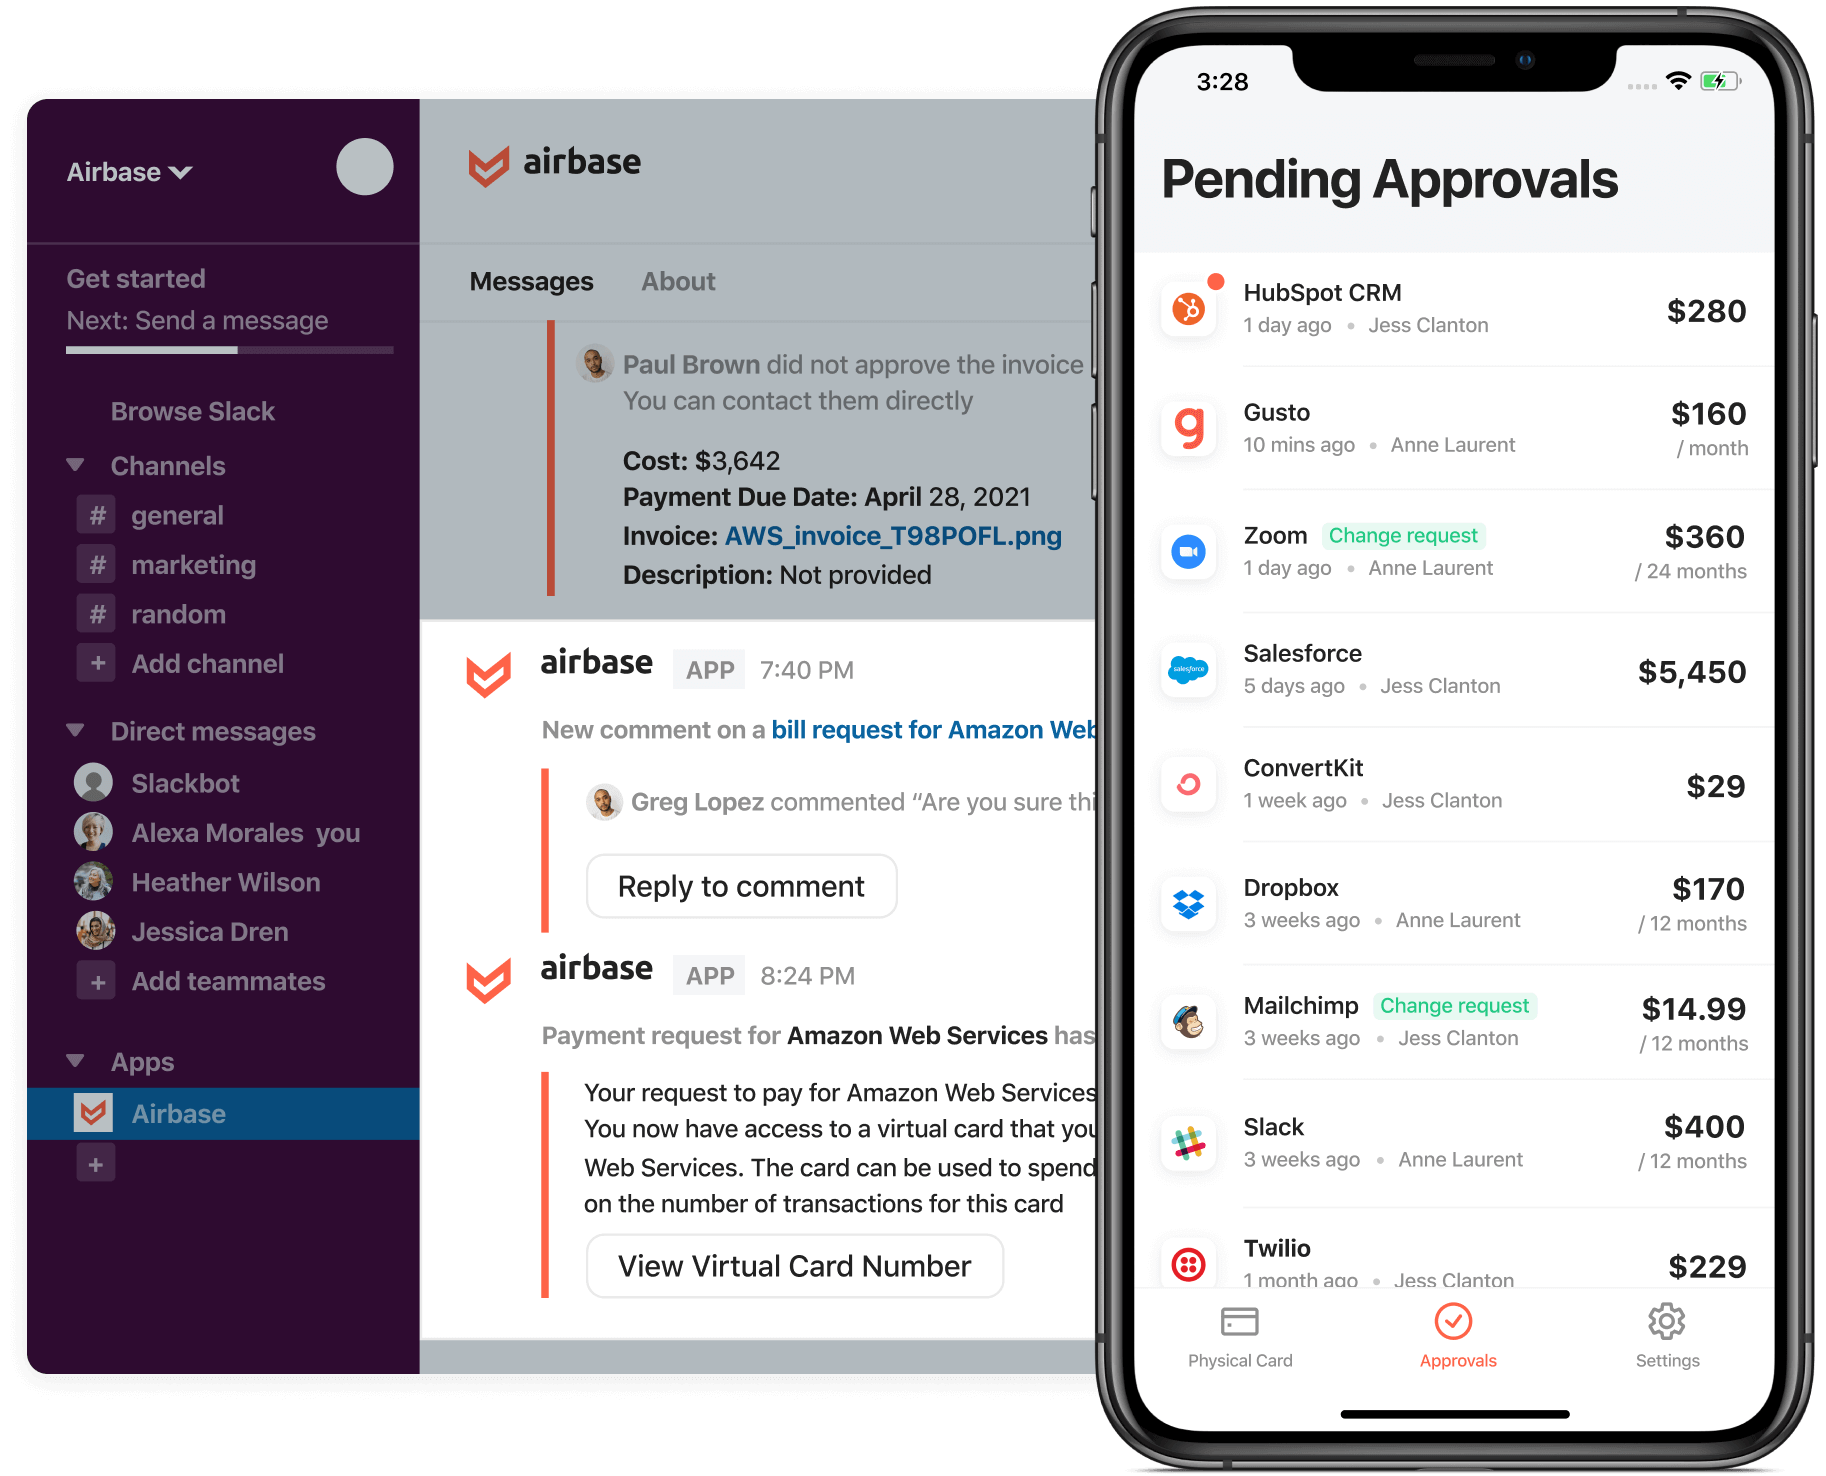 Approval workflows